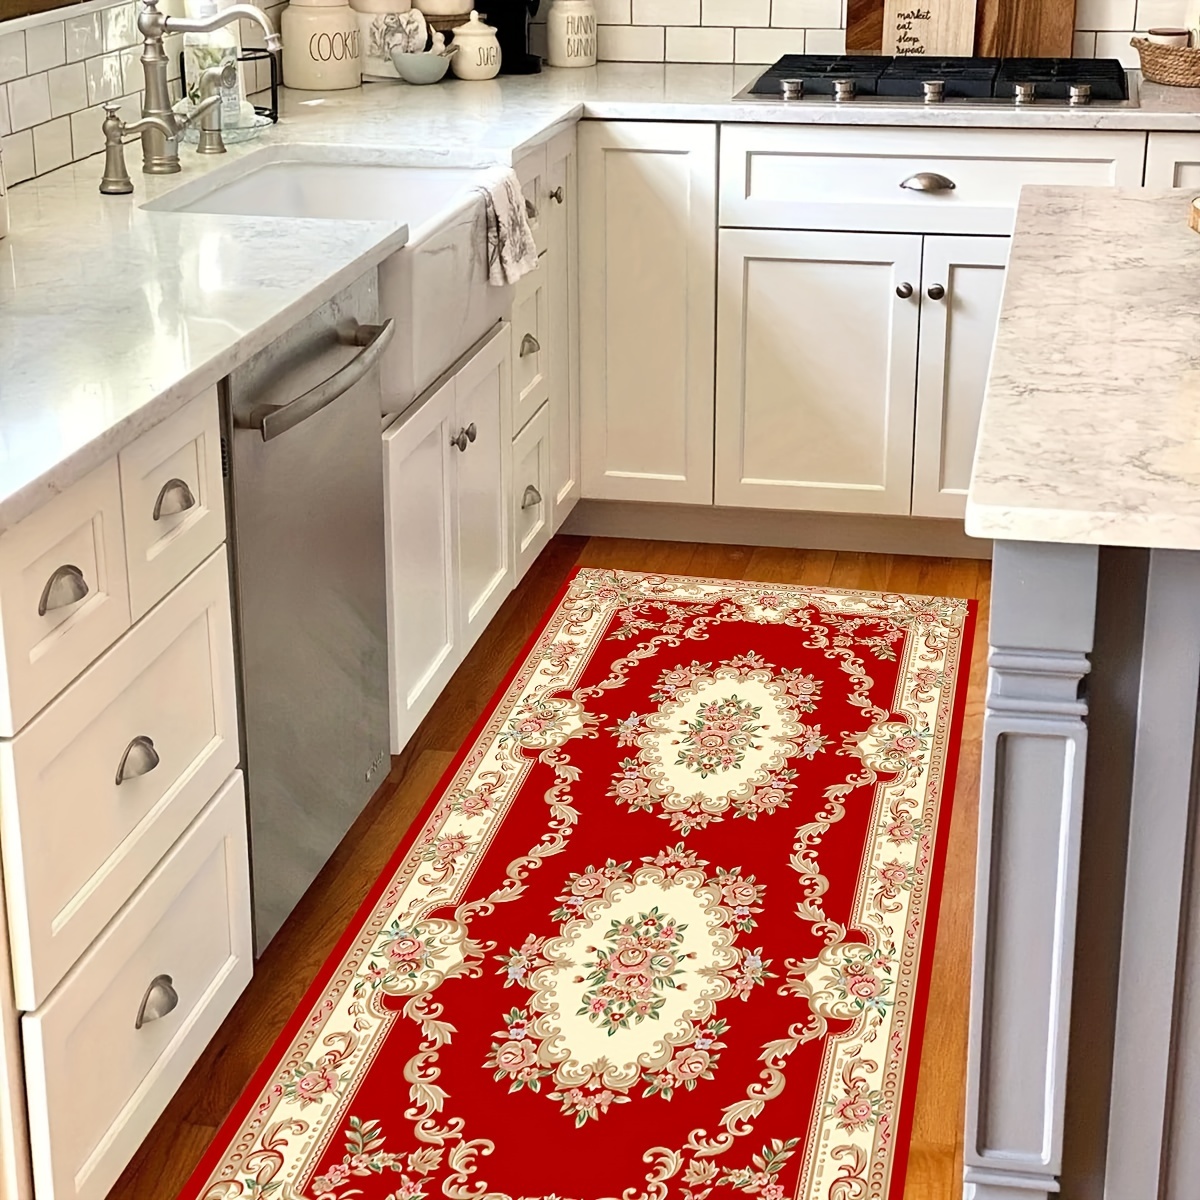 1pc Bohemian Style Colorful Geometric Pattern Carpet And 2pcs Farmhouse Kitchen  Sink Mats, Non-slip Water Absorbent Anti-stain Kitchen Laundry Area Rug